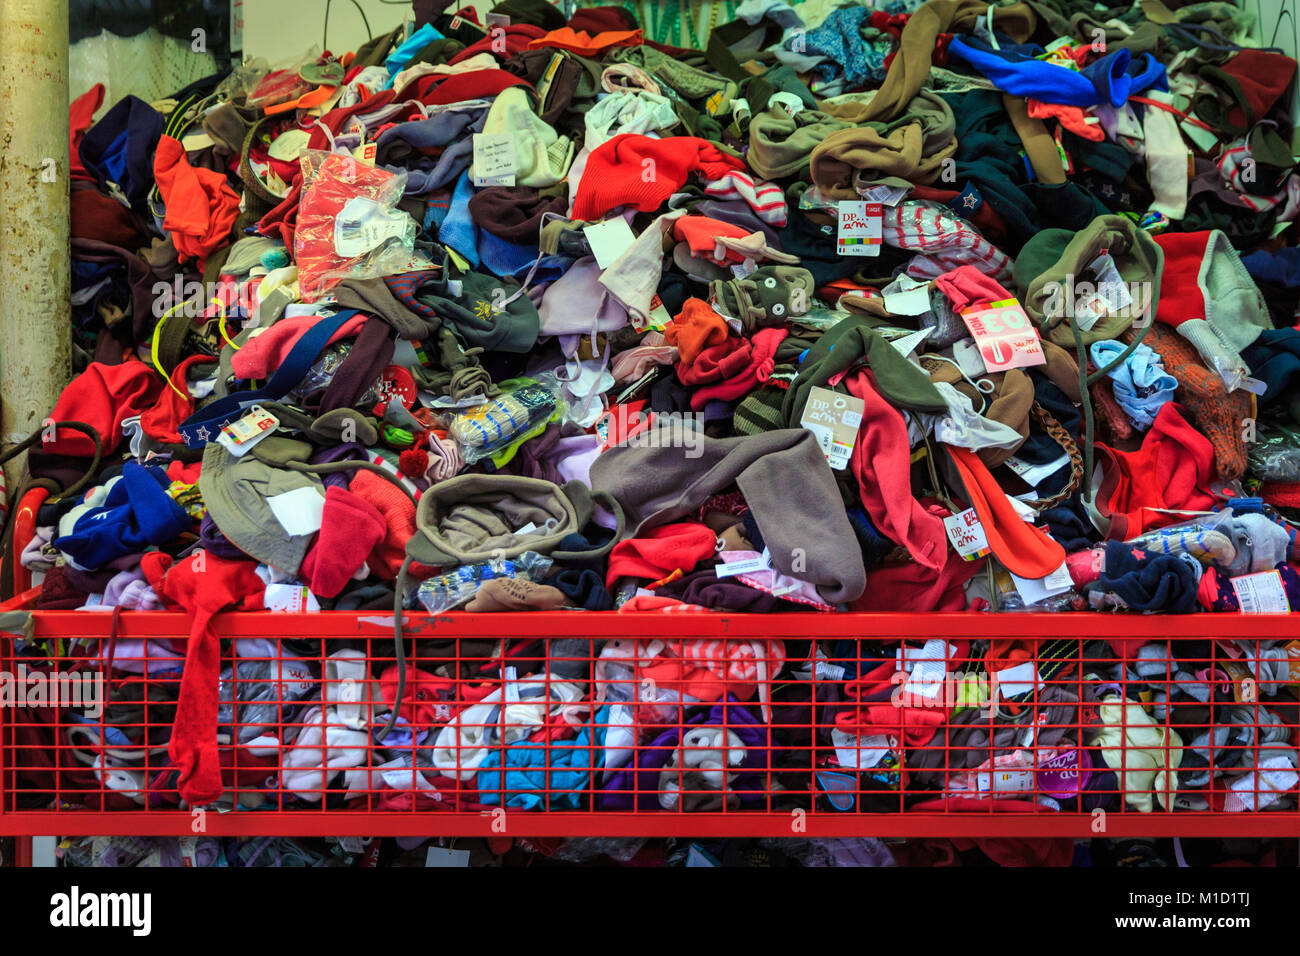 Heap of clothes, garments and accessories in a pile for bargain shopping, shop front exterior, France Stock Photo